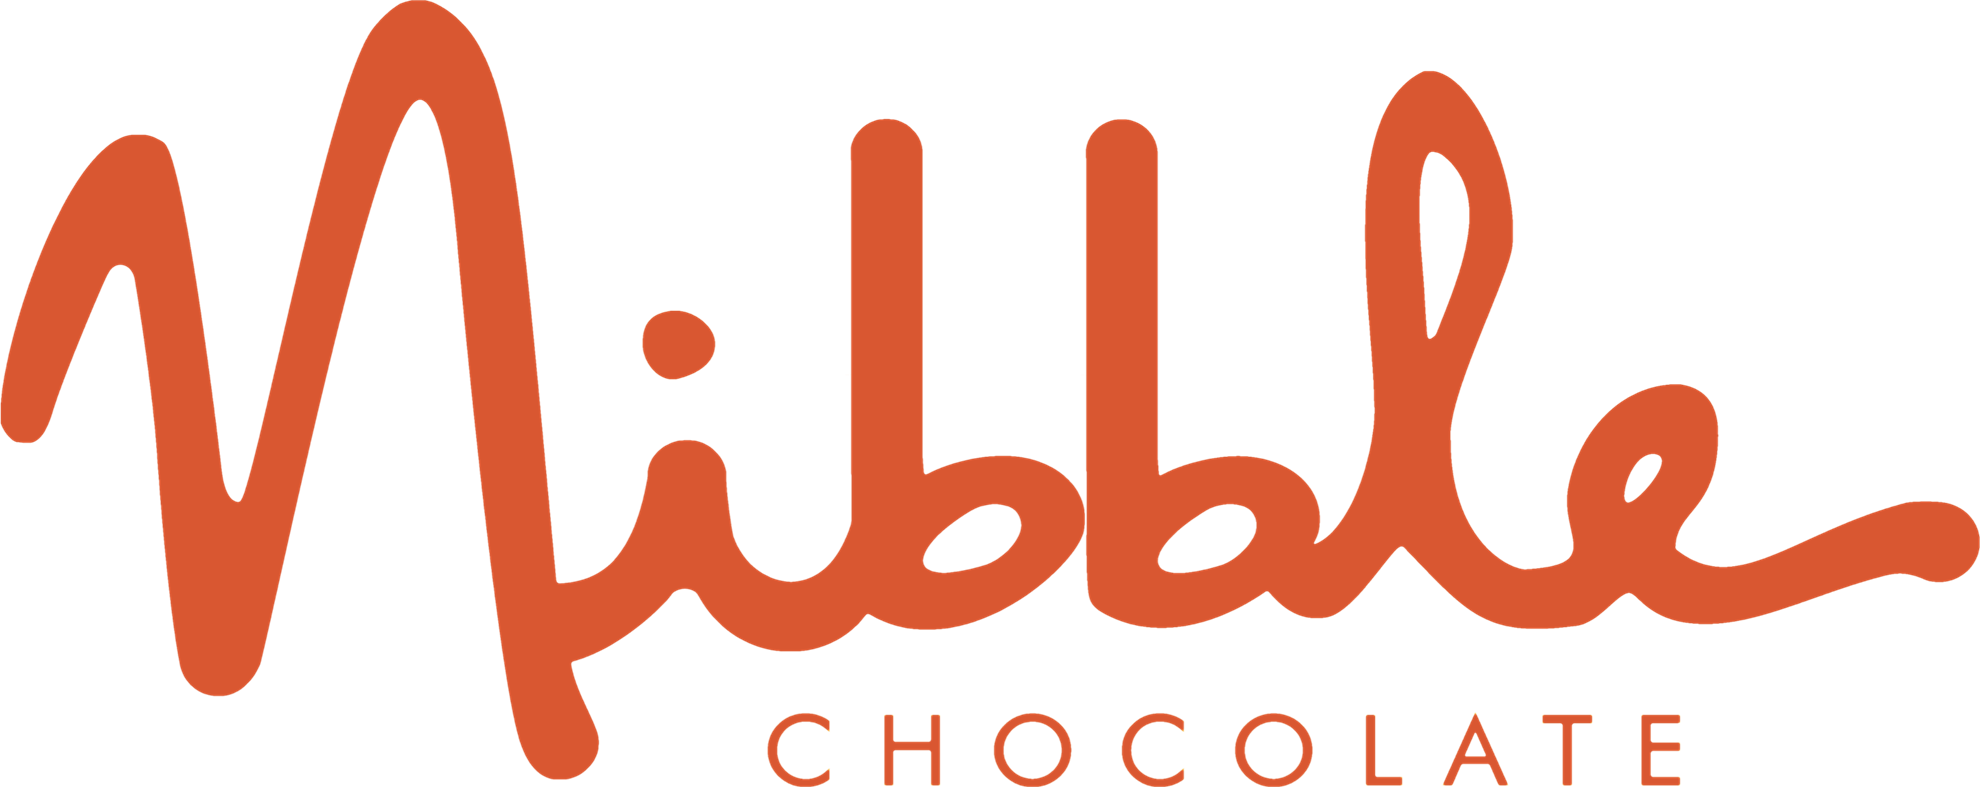 Nibble Chocolate Is Handcrafted In Small Batches From - Nibble Chocolate (1980x787)